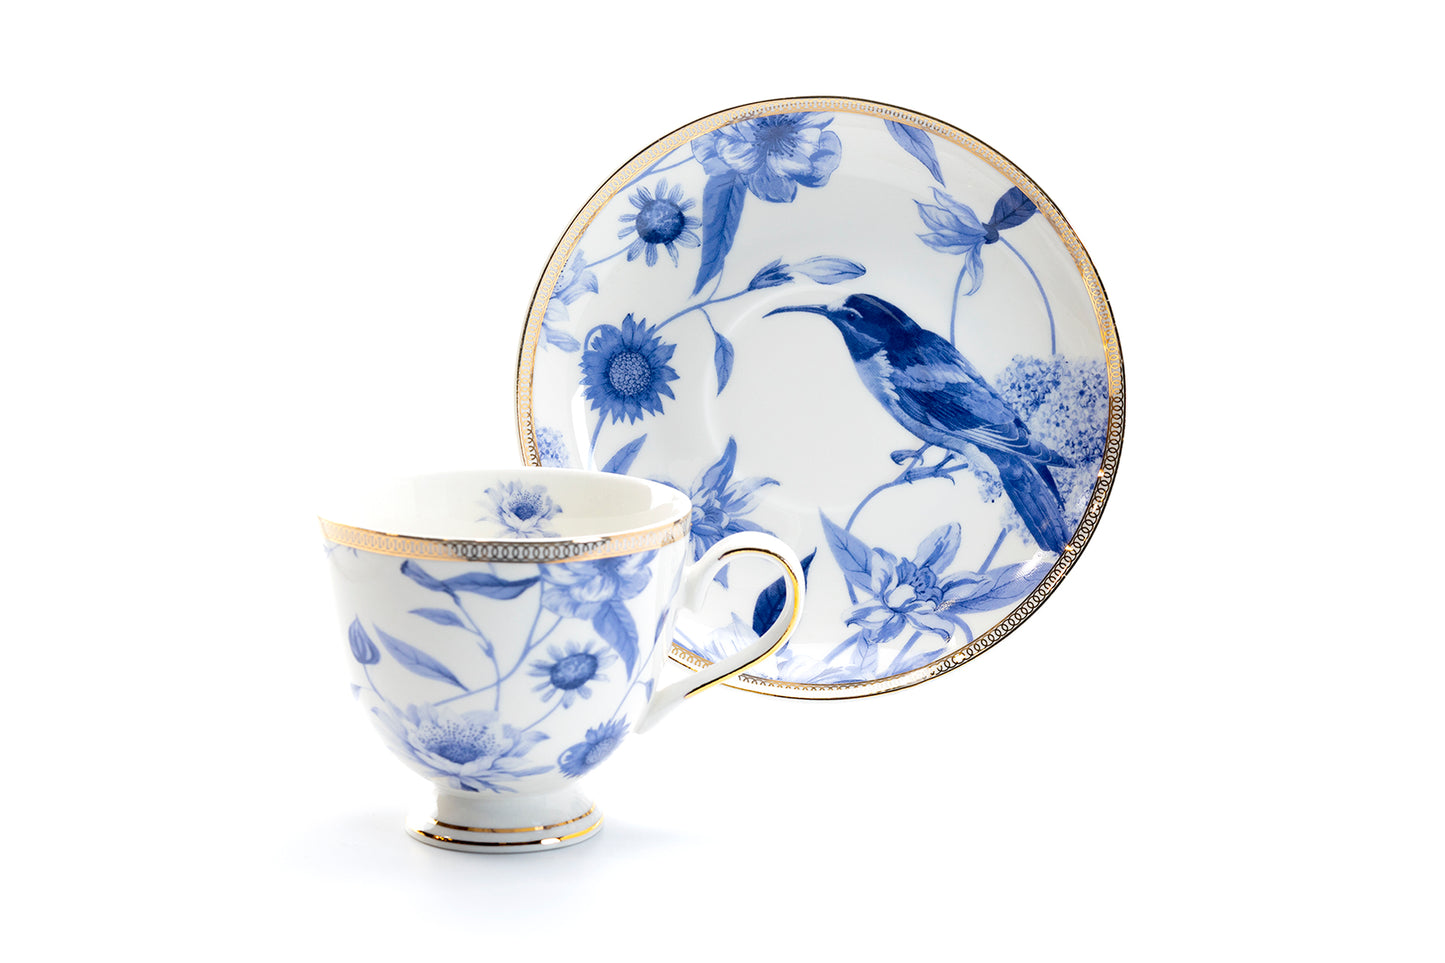 Grace Blue Spring Flowers with Hummingbird Fine Porcelain Tea Cup and Saucer